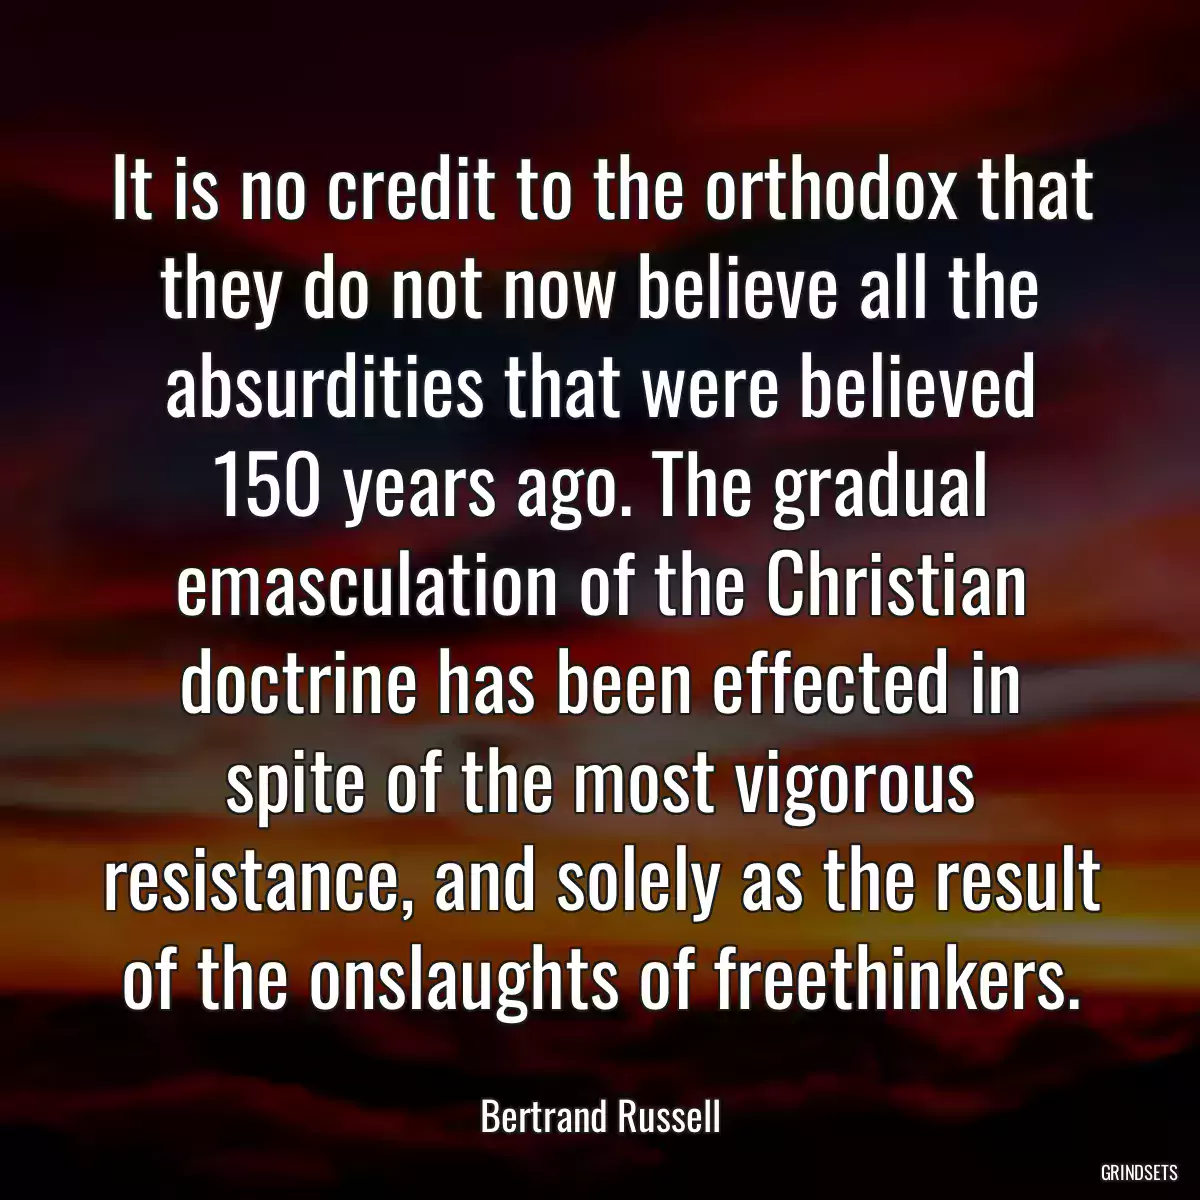 It is no credit to the orthodox that they do not now believe all the absurdities that were believed 150 years ago. The gradual emasculation of the Christian doctrine has been effected in spite of the most vigorous resistance, and solely as the result of the onslaughts of freethinkers.